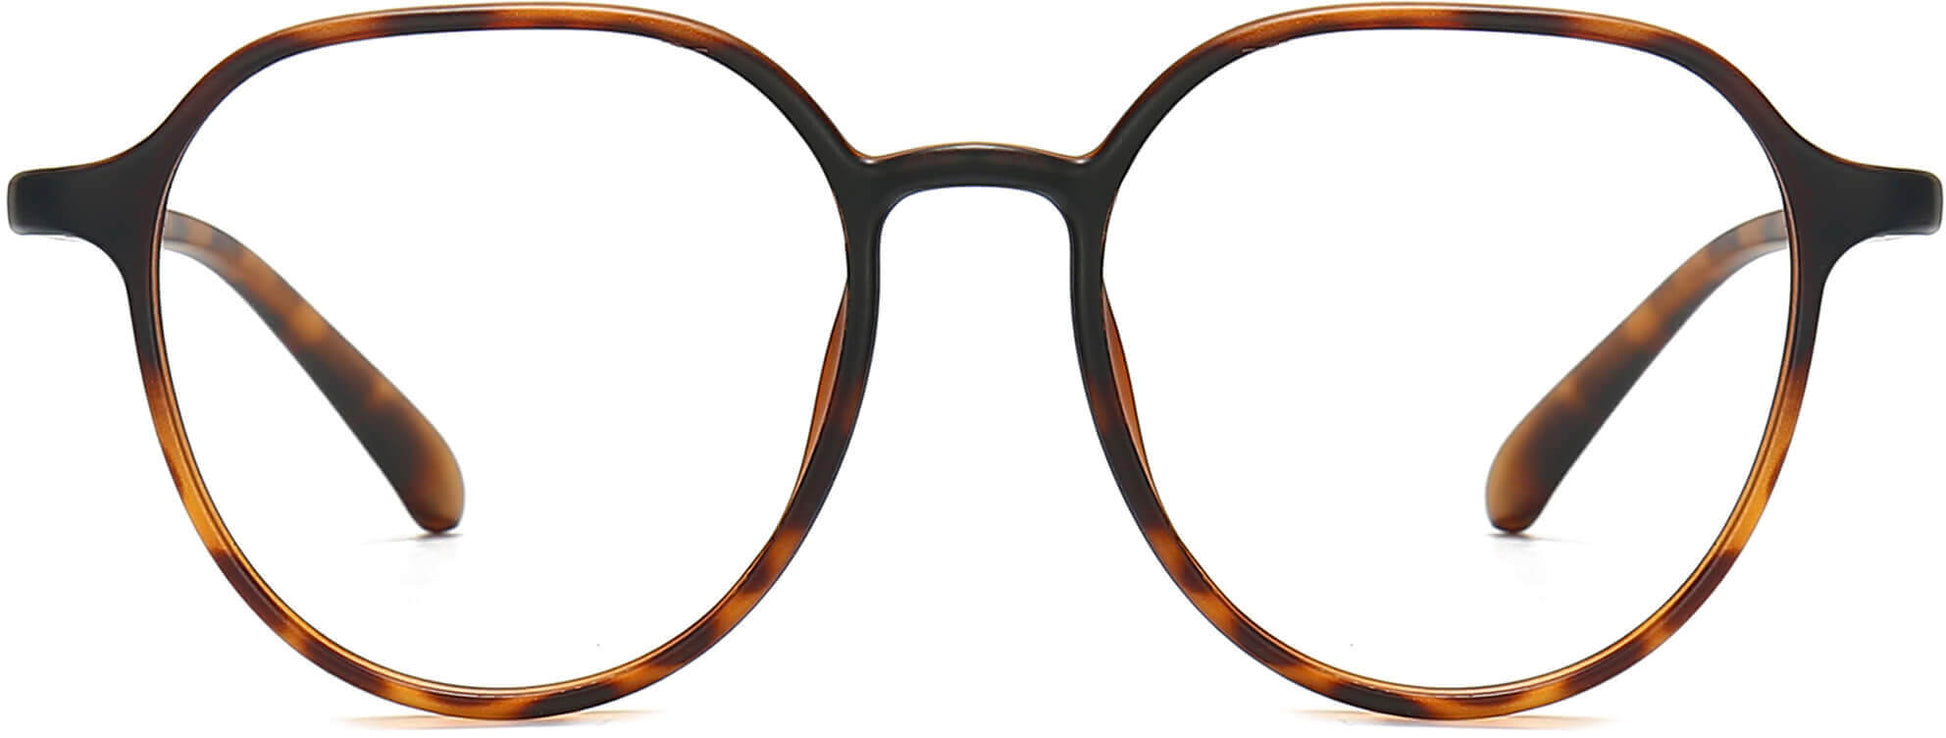 Augustus Round Tortoise Eyeglasses from ANRRI, front view